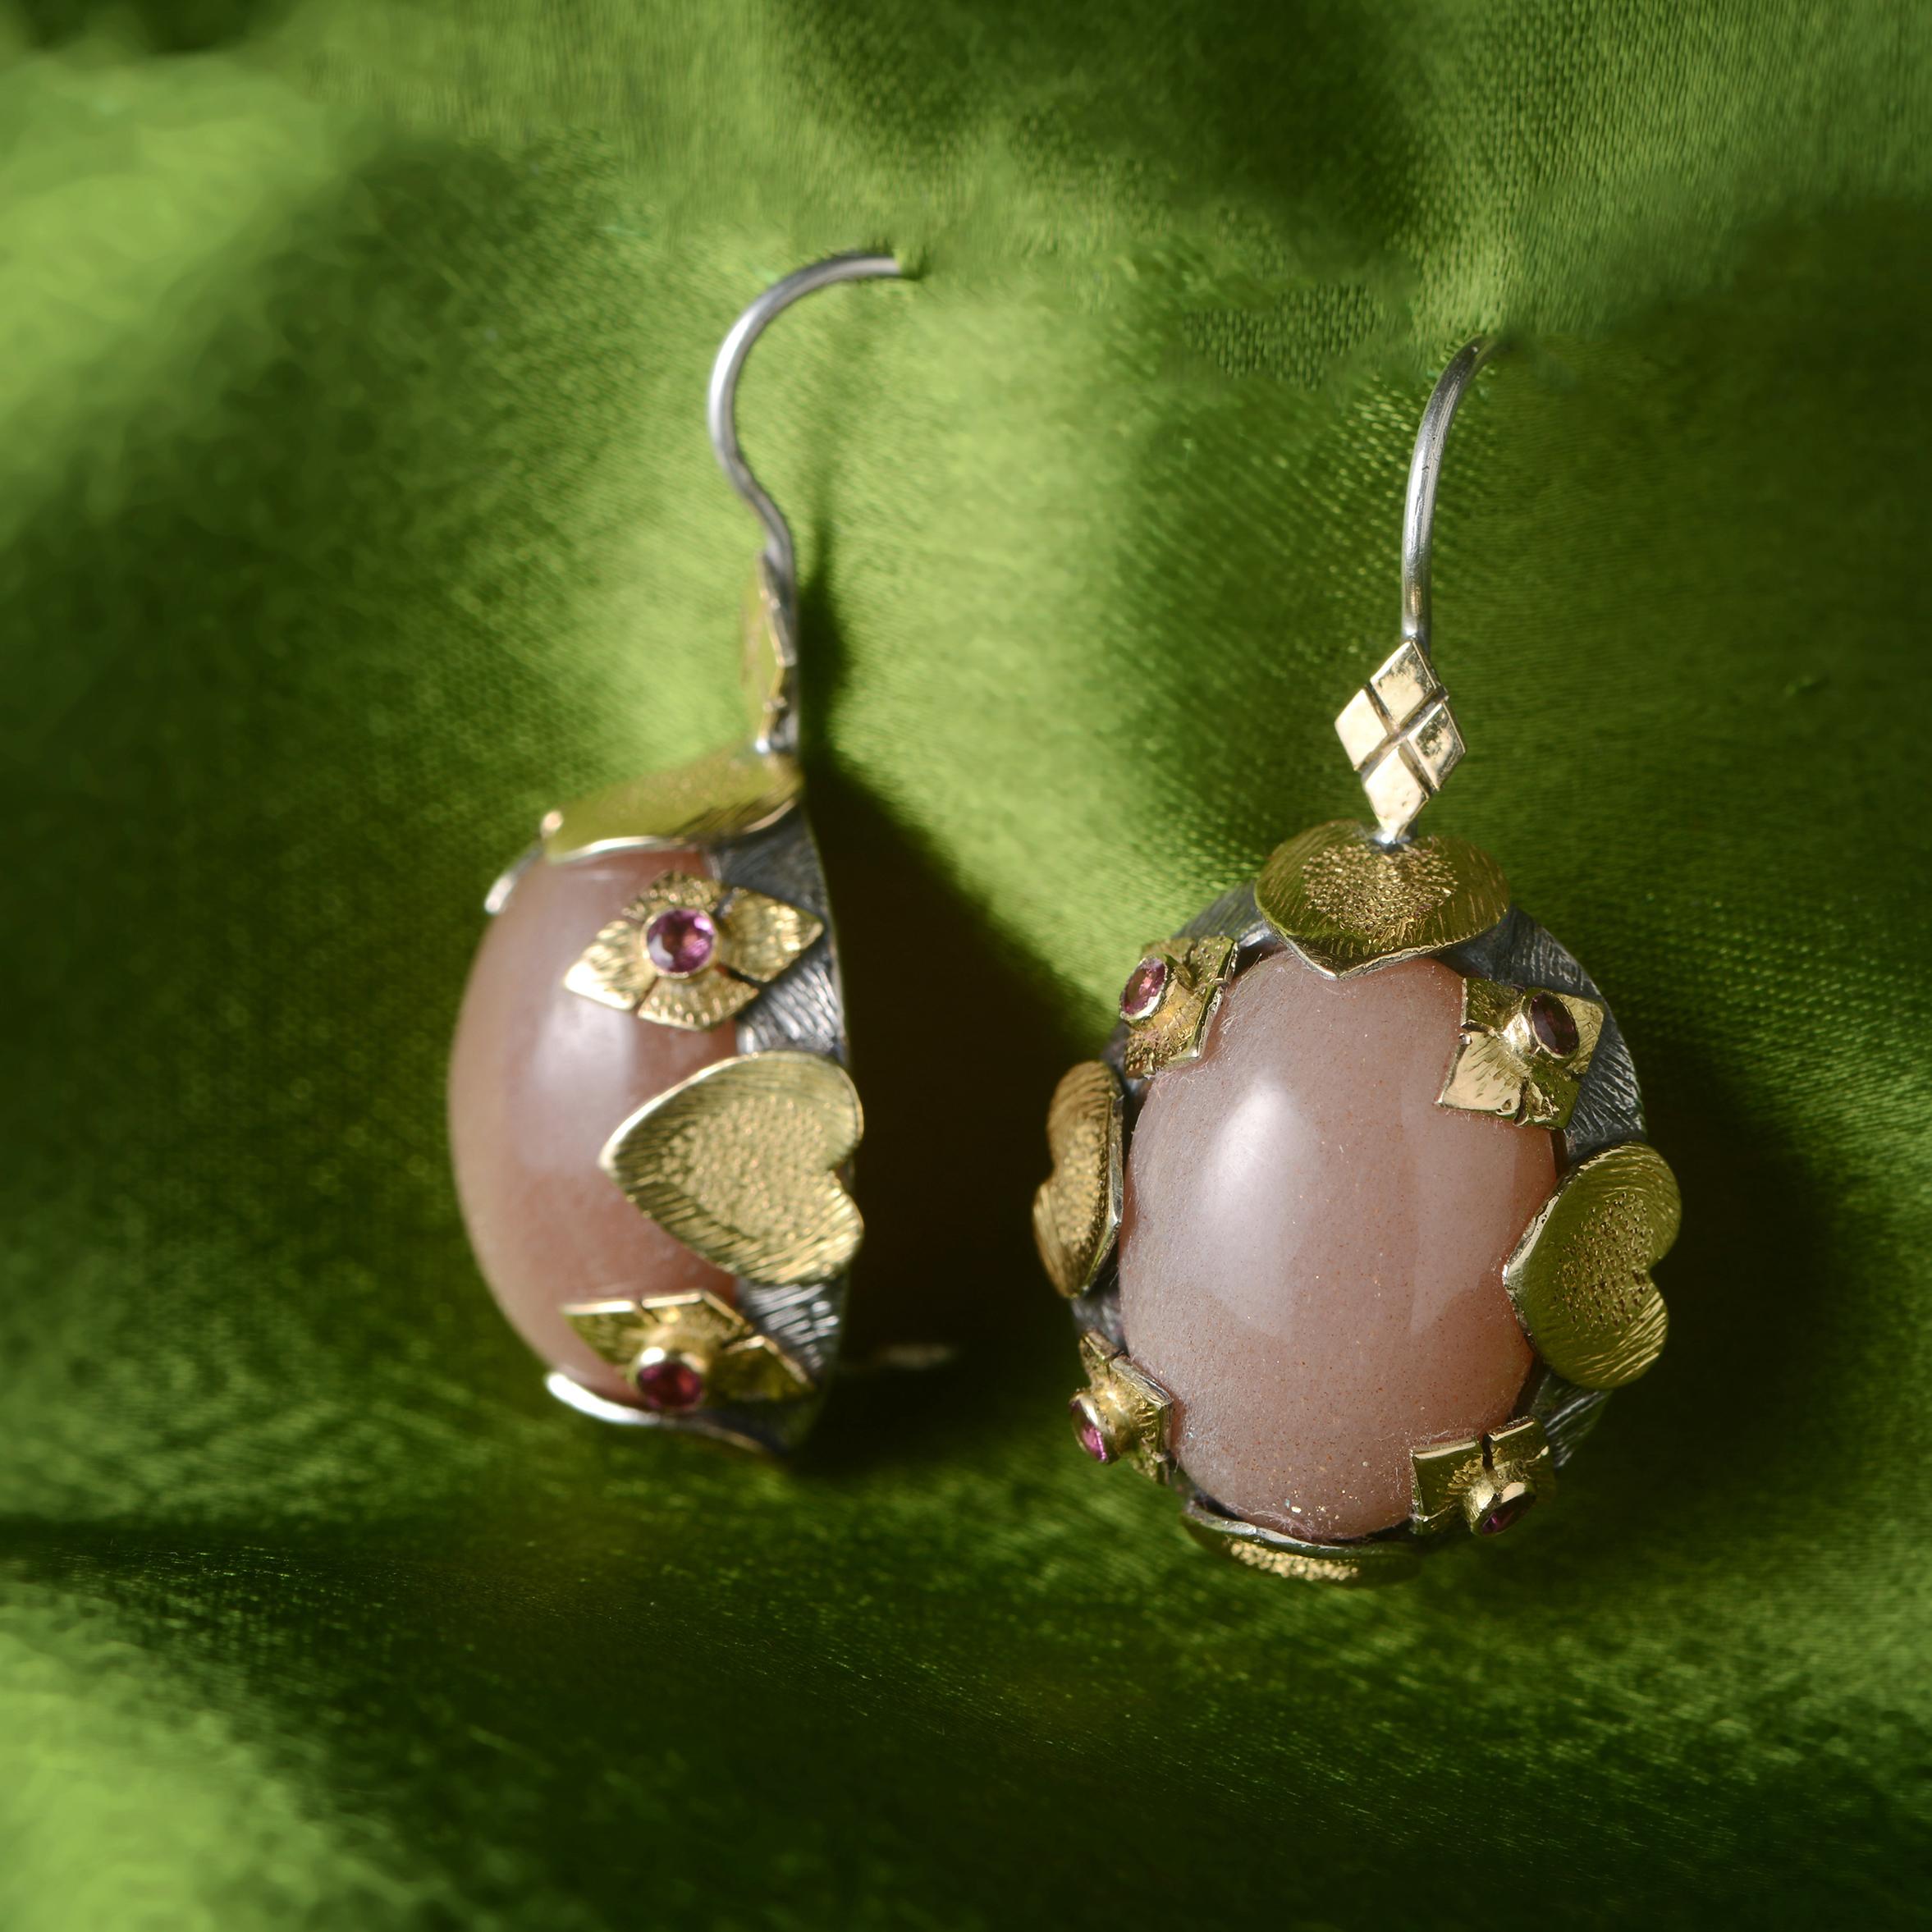 These gorgeous moonstone tourmaline earrings are one of a kind.

Handmade in our workshops they have chocolate moonstone drops, which are surrounded by pink tourmalines. We have used hand engraved 18ct gold and overlaid it onto oxidized silver. The